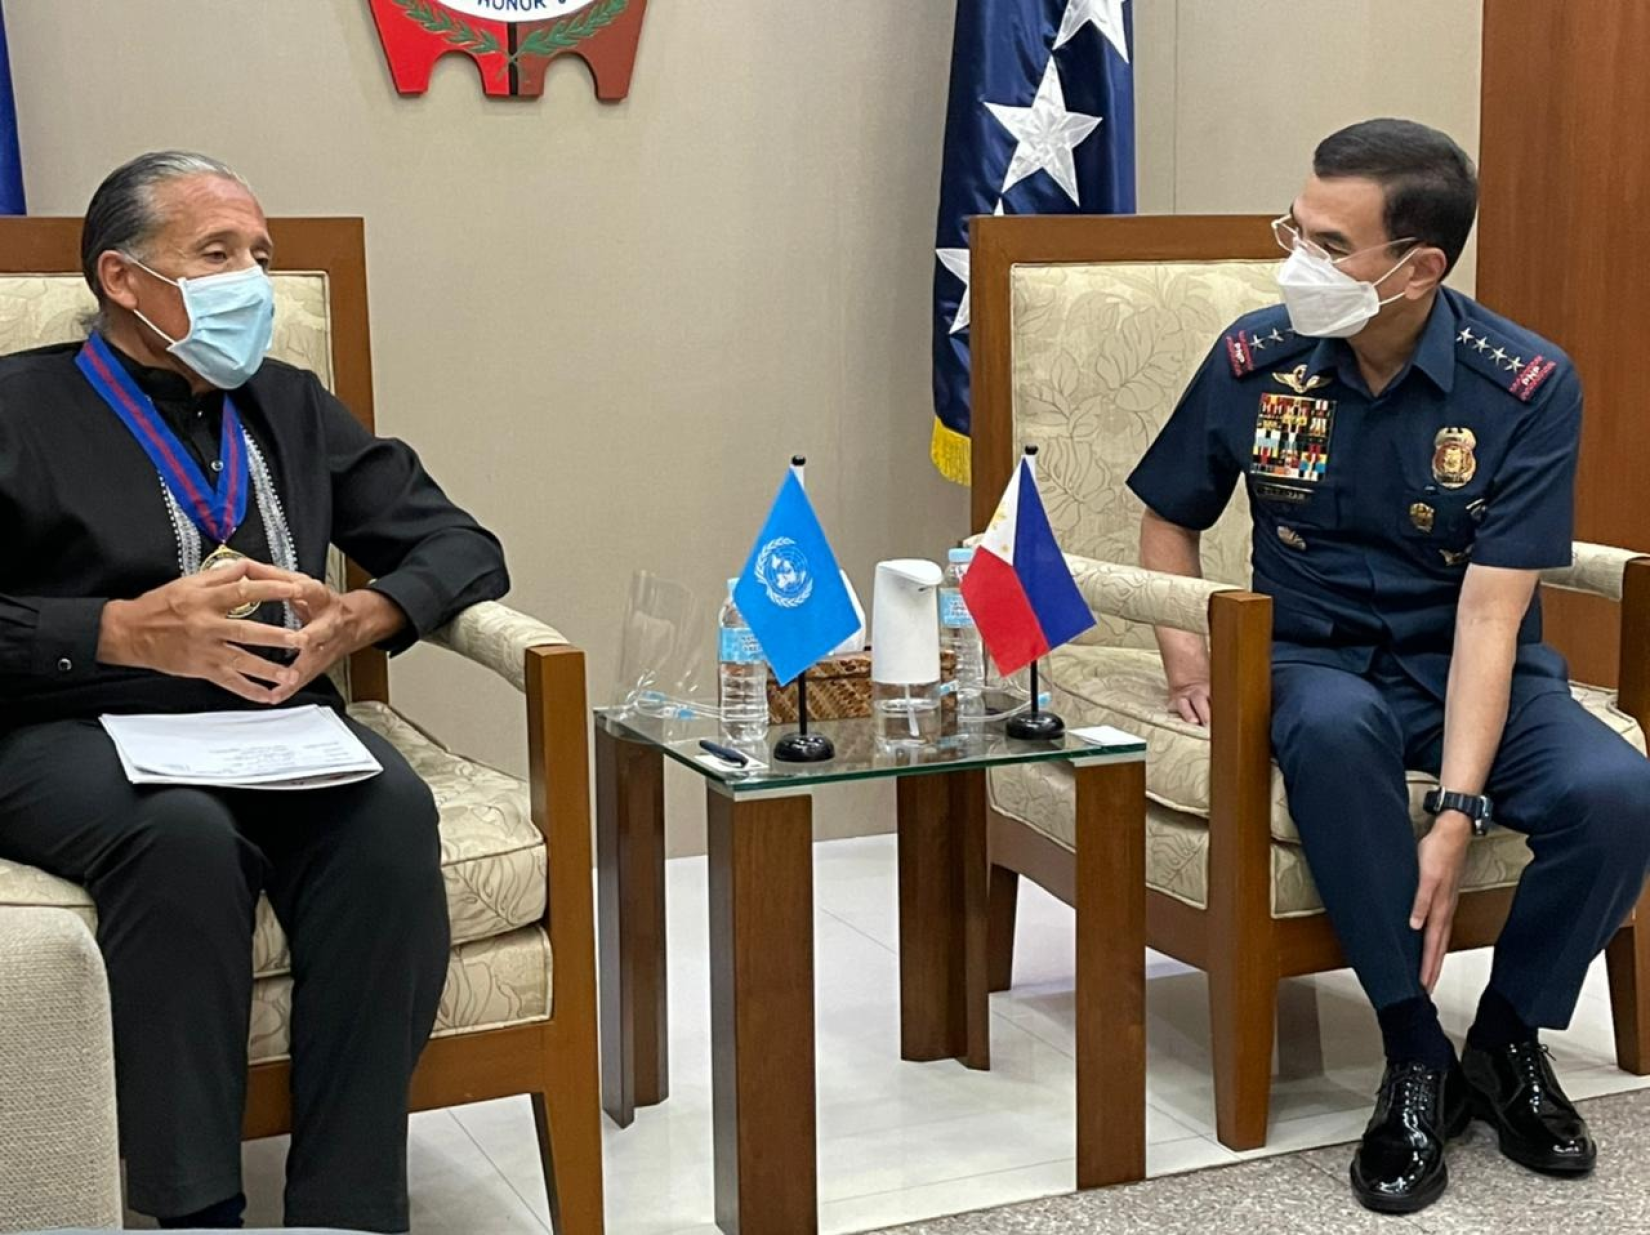 UN Philippines Resident Coordinator meets with PNP Chief